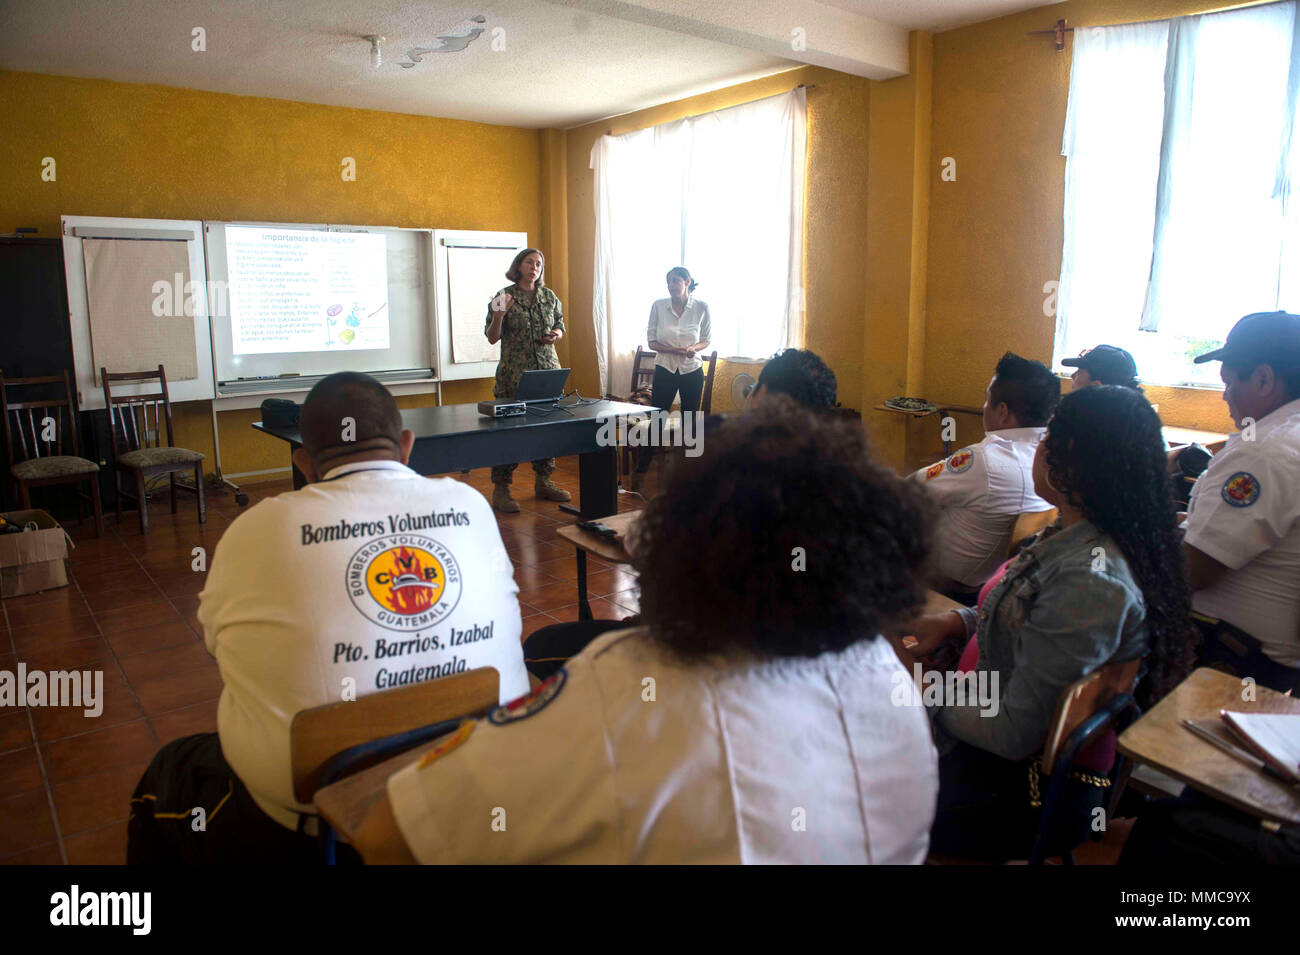 171011-N-YM856-0032 PUERTO BARRIOS, Guatemala (Oct. 11, 2017) Cmdr. Rhonda Lizewski, assigned to Navy and Marine Corps Public Health Center, gives a lecture on infection control to Guatemalan first responders during Southern Partnership Station 17 (SPS 17). SPS 17 is a U.S. Navy deployment executed by U.S. Naval Forces Southern Command/U.S. 4th Fleet, focused on subject matter expert exchanges with partner nation militaries and security forces in Central and South America. (U.S. Navy Combat Camera photo by Mass Communication Specialist 2nd Class Brittney Cannady/Released) Stock Photo